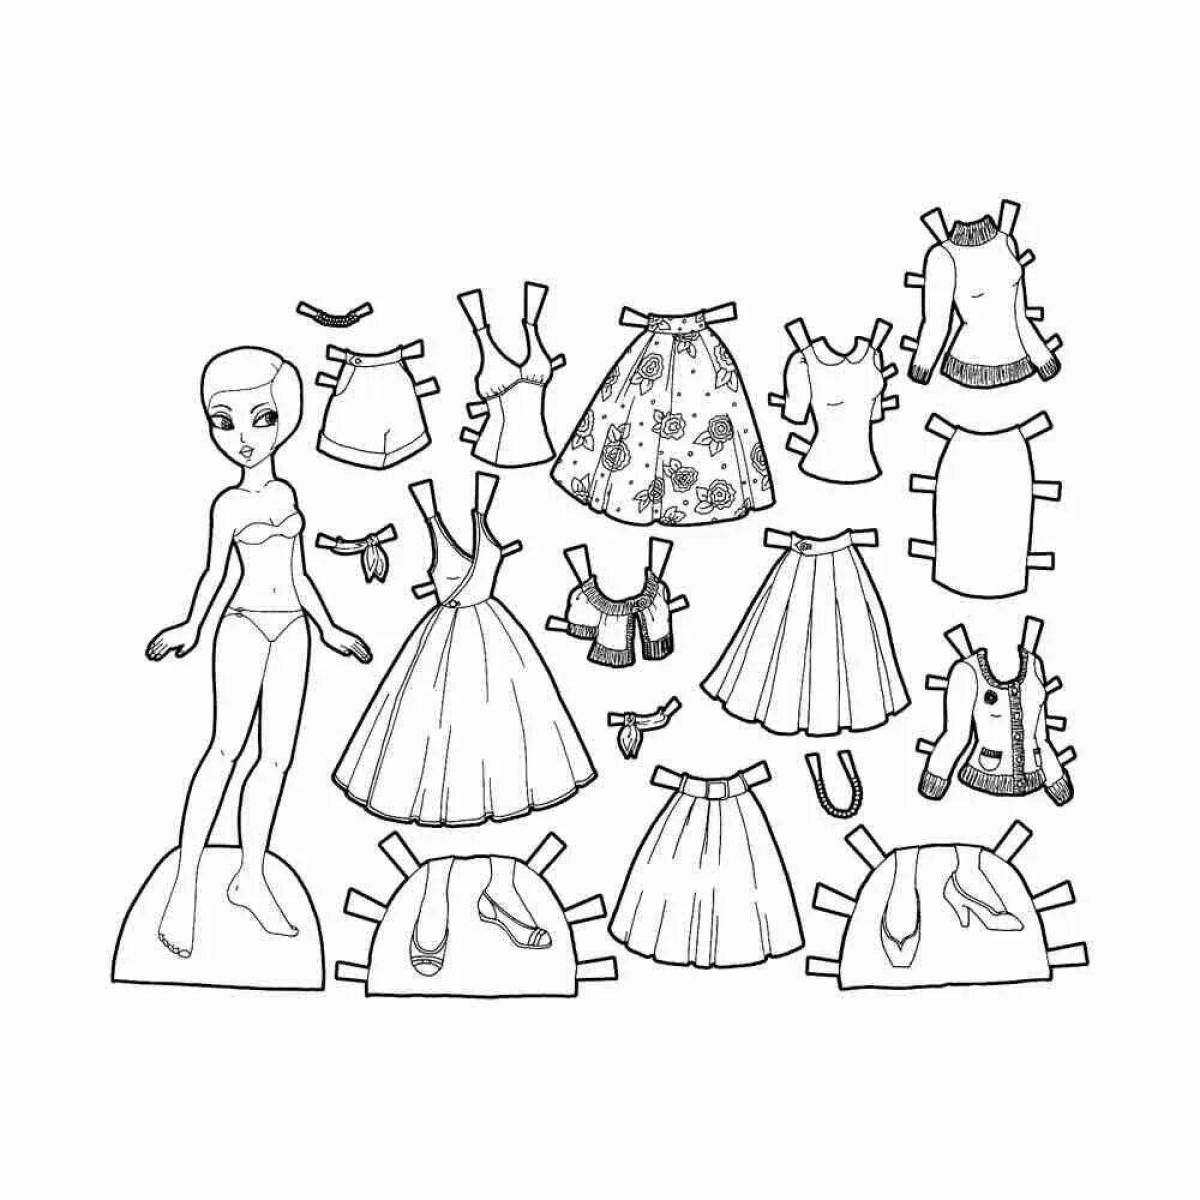 Charming lol doll coloring book with clothes and accessories